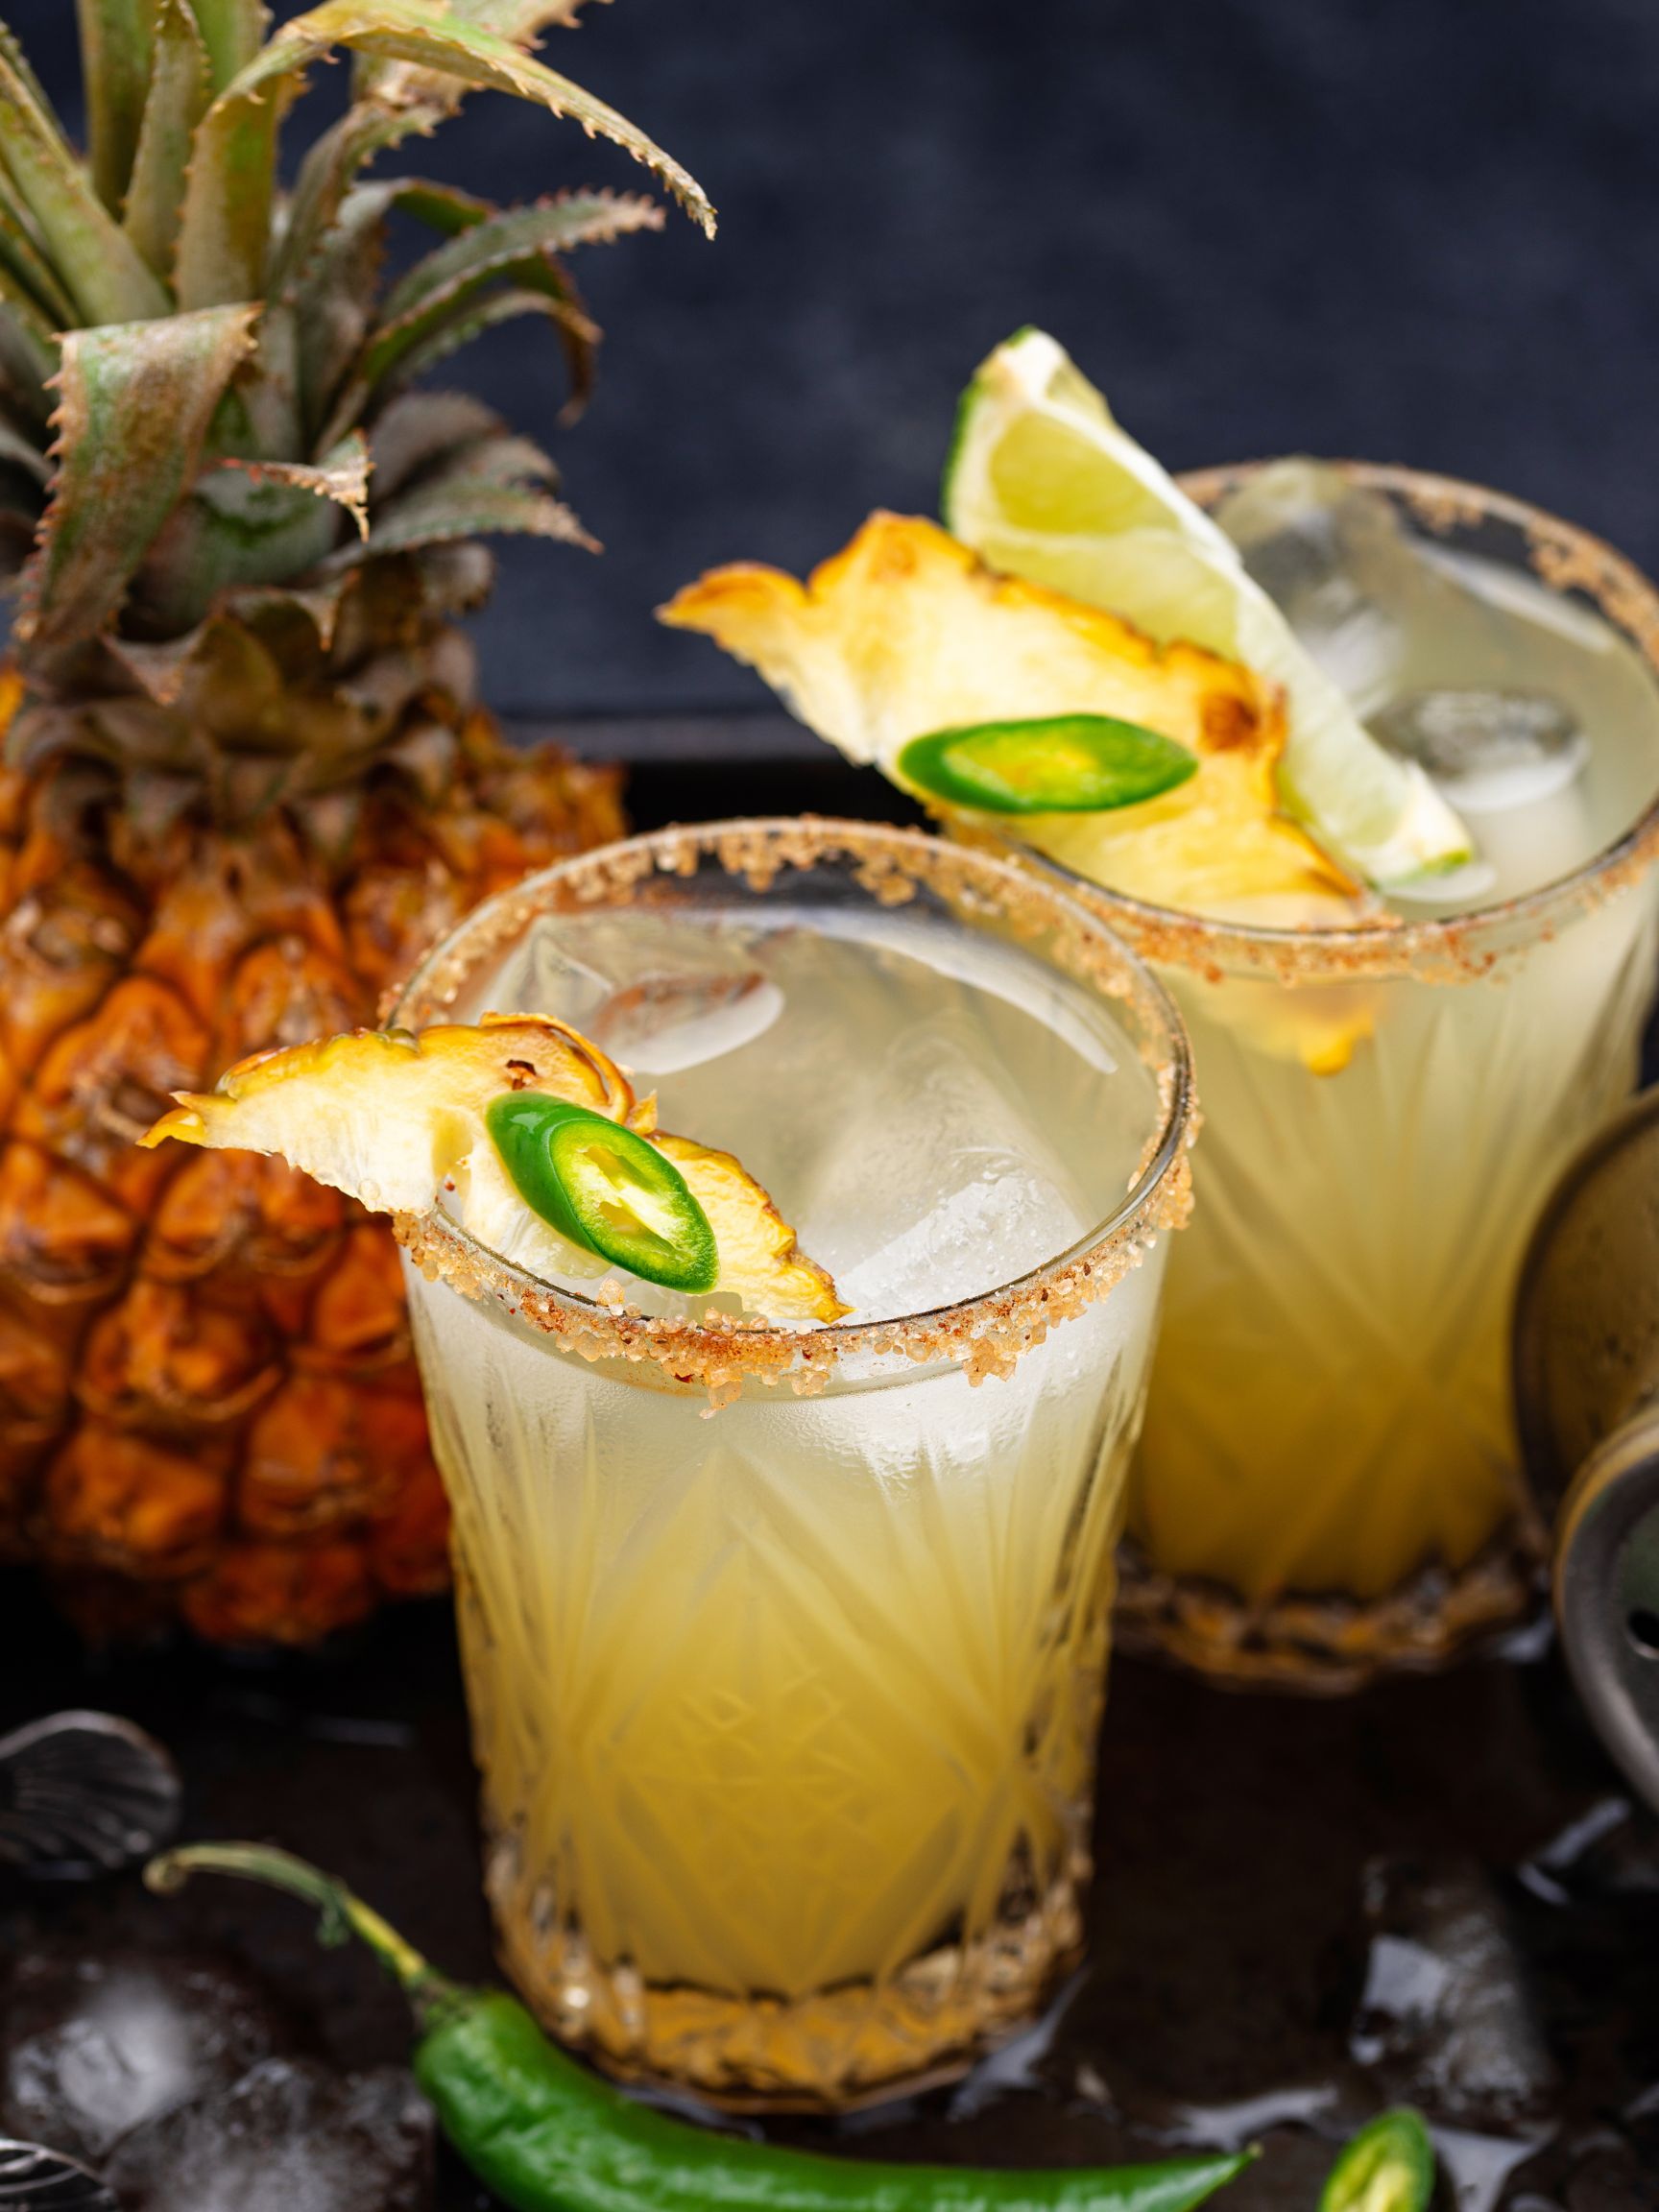 Spice Up Your Life: Spicy Mezcal Mule